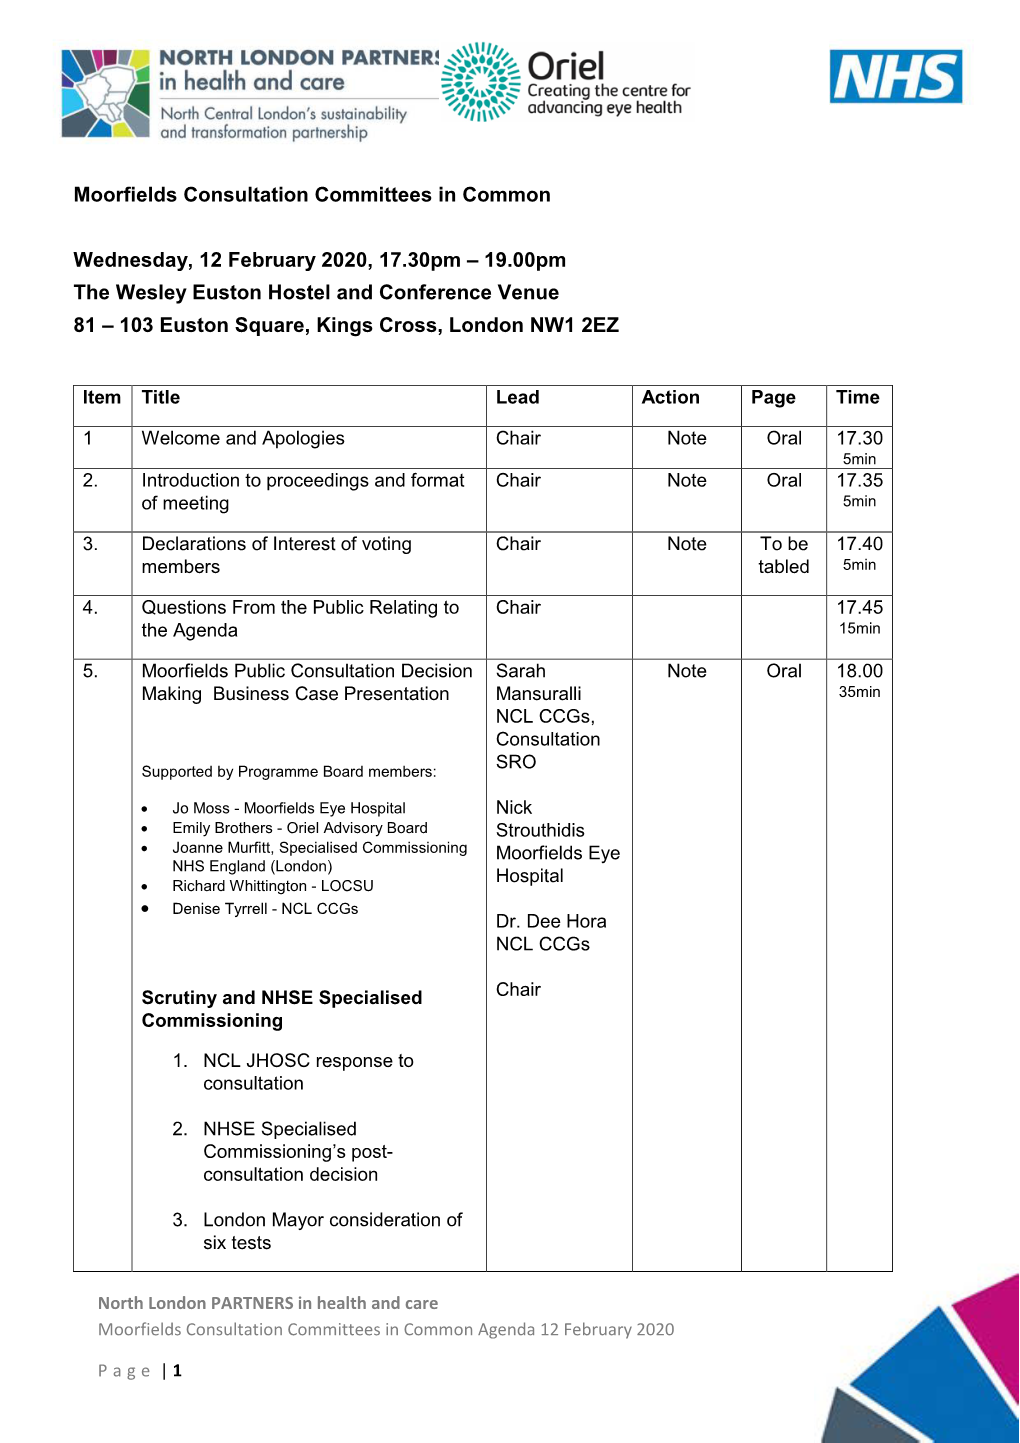 Moorfields Consultation Committees in Common Wednesday, 12